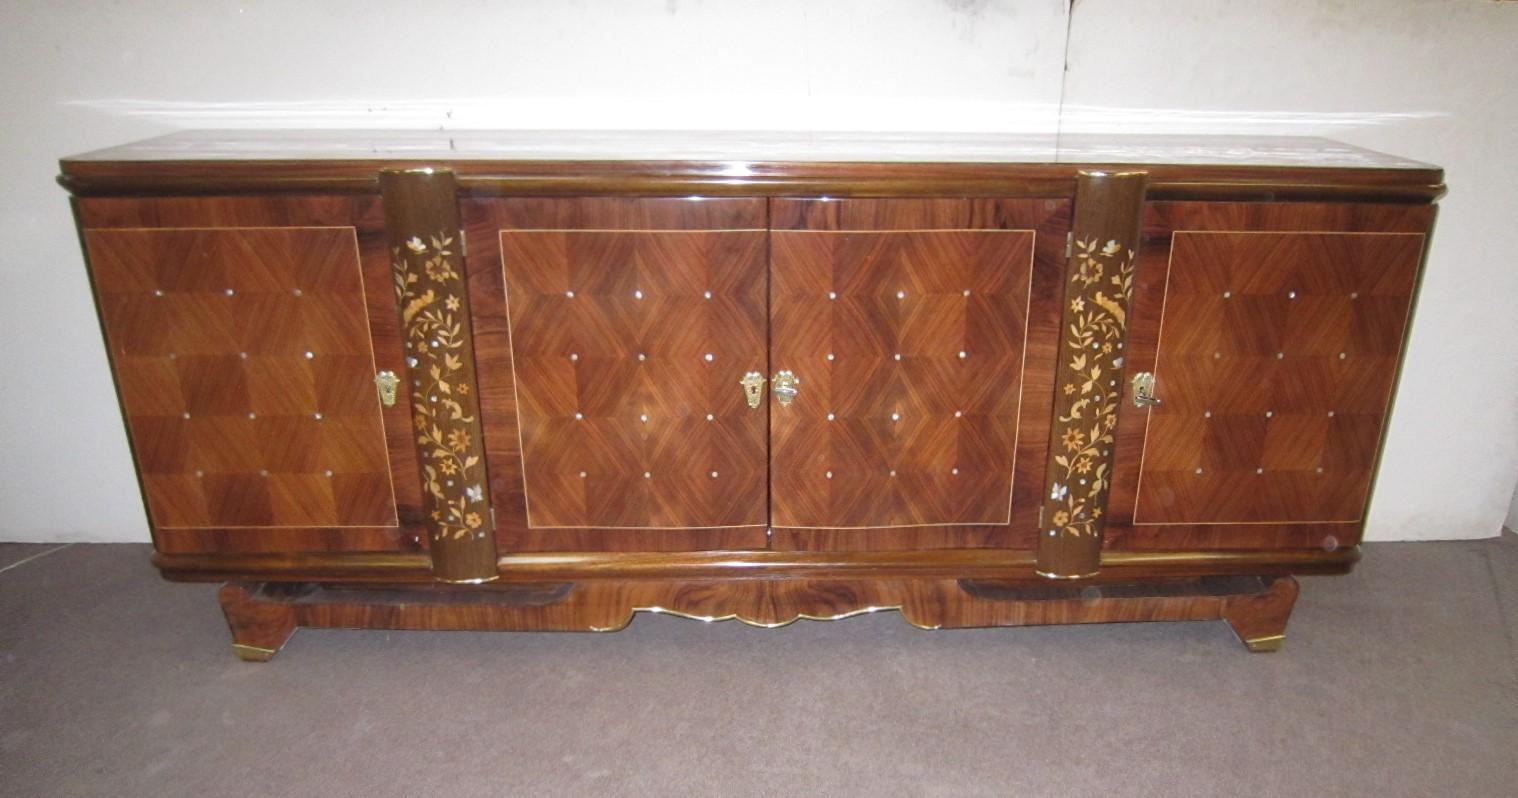 An exceptional French Moderne credenza in palisander and walnut veneer with inlaid parquetry and marquetry features in exotic woods.
Elegantly dotted patterns on parquetry doors combined with floral and animal marquetry details on intersecting